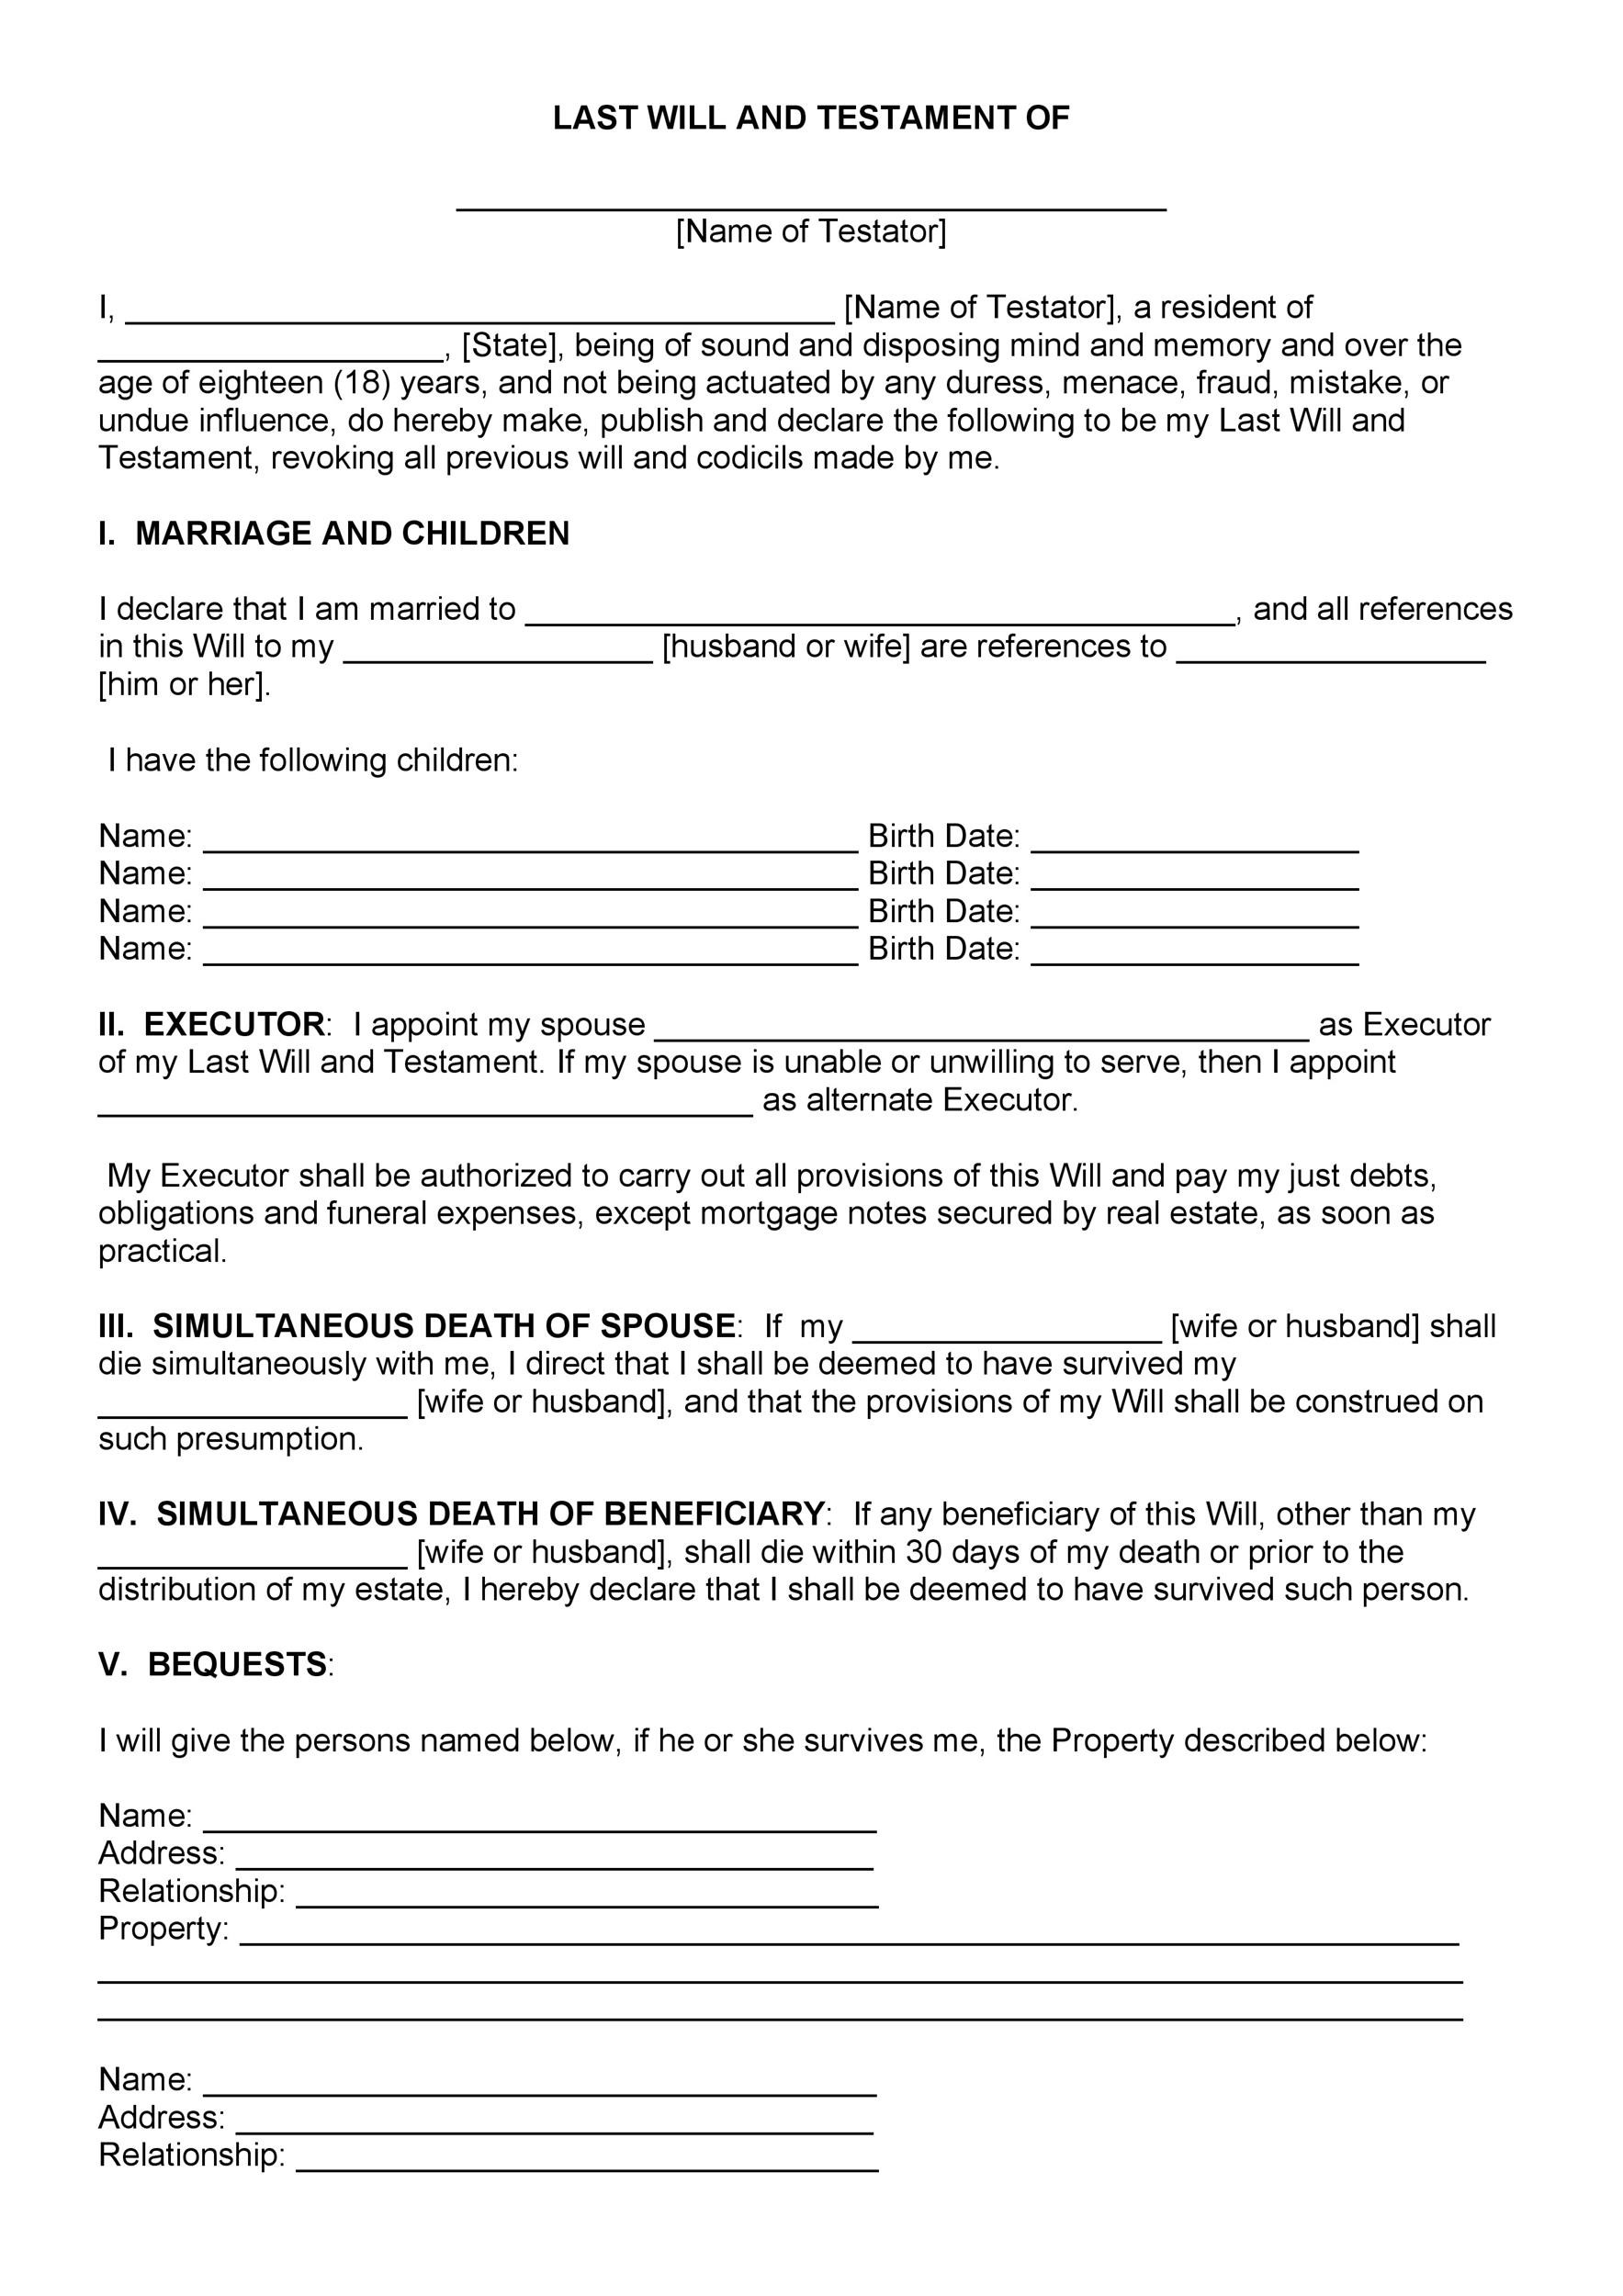 Free Last Will And Testament Printable Form What's the problem with